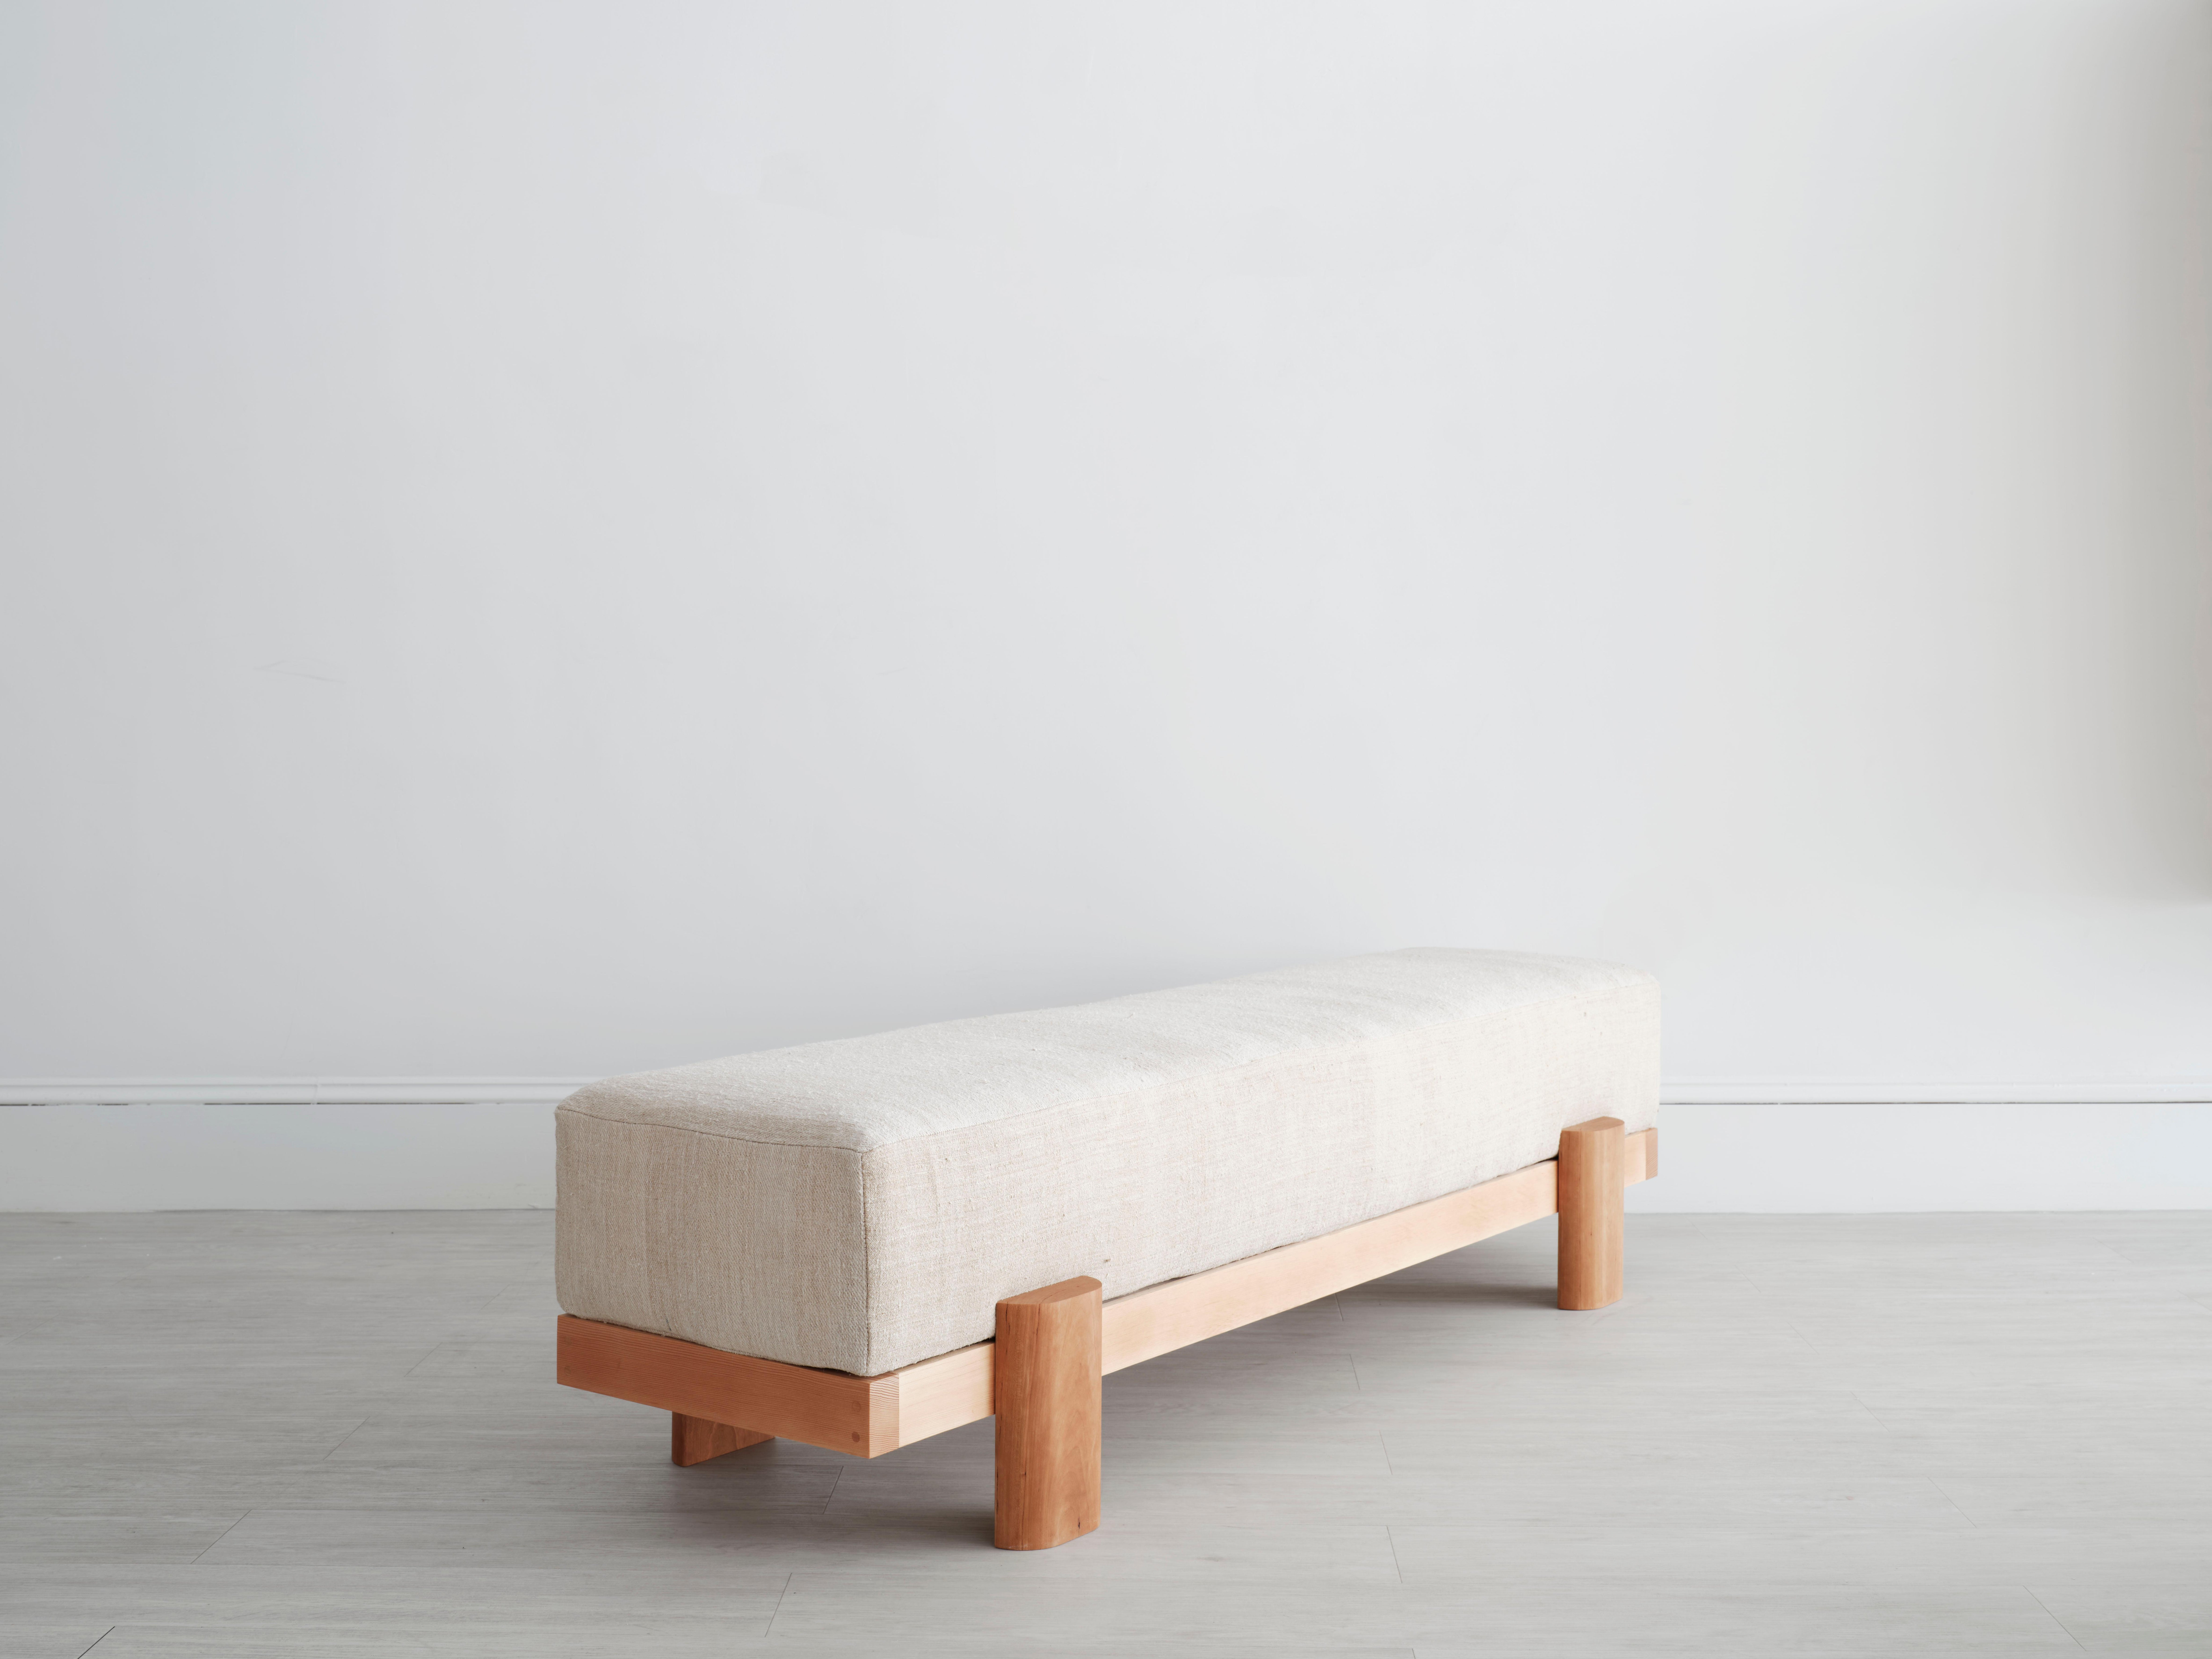 This elemental wood-frame bench with a soft top is shown upholstered in one-of-a-kind vintage linen, but it is available made to order in COM / COL. It can also be custom ordered in other sizes and wood types.

Materials: Cherry wood, douglas fir,